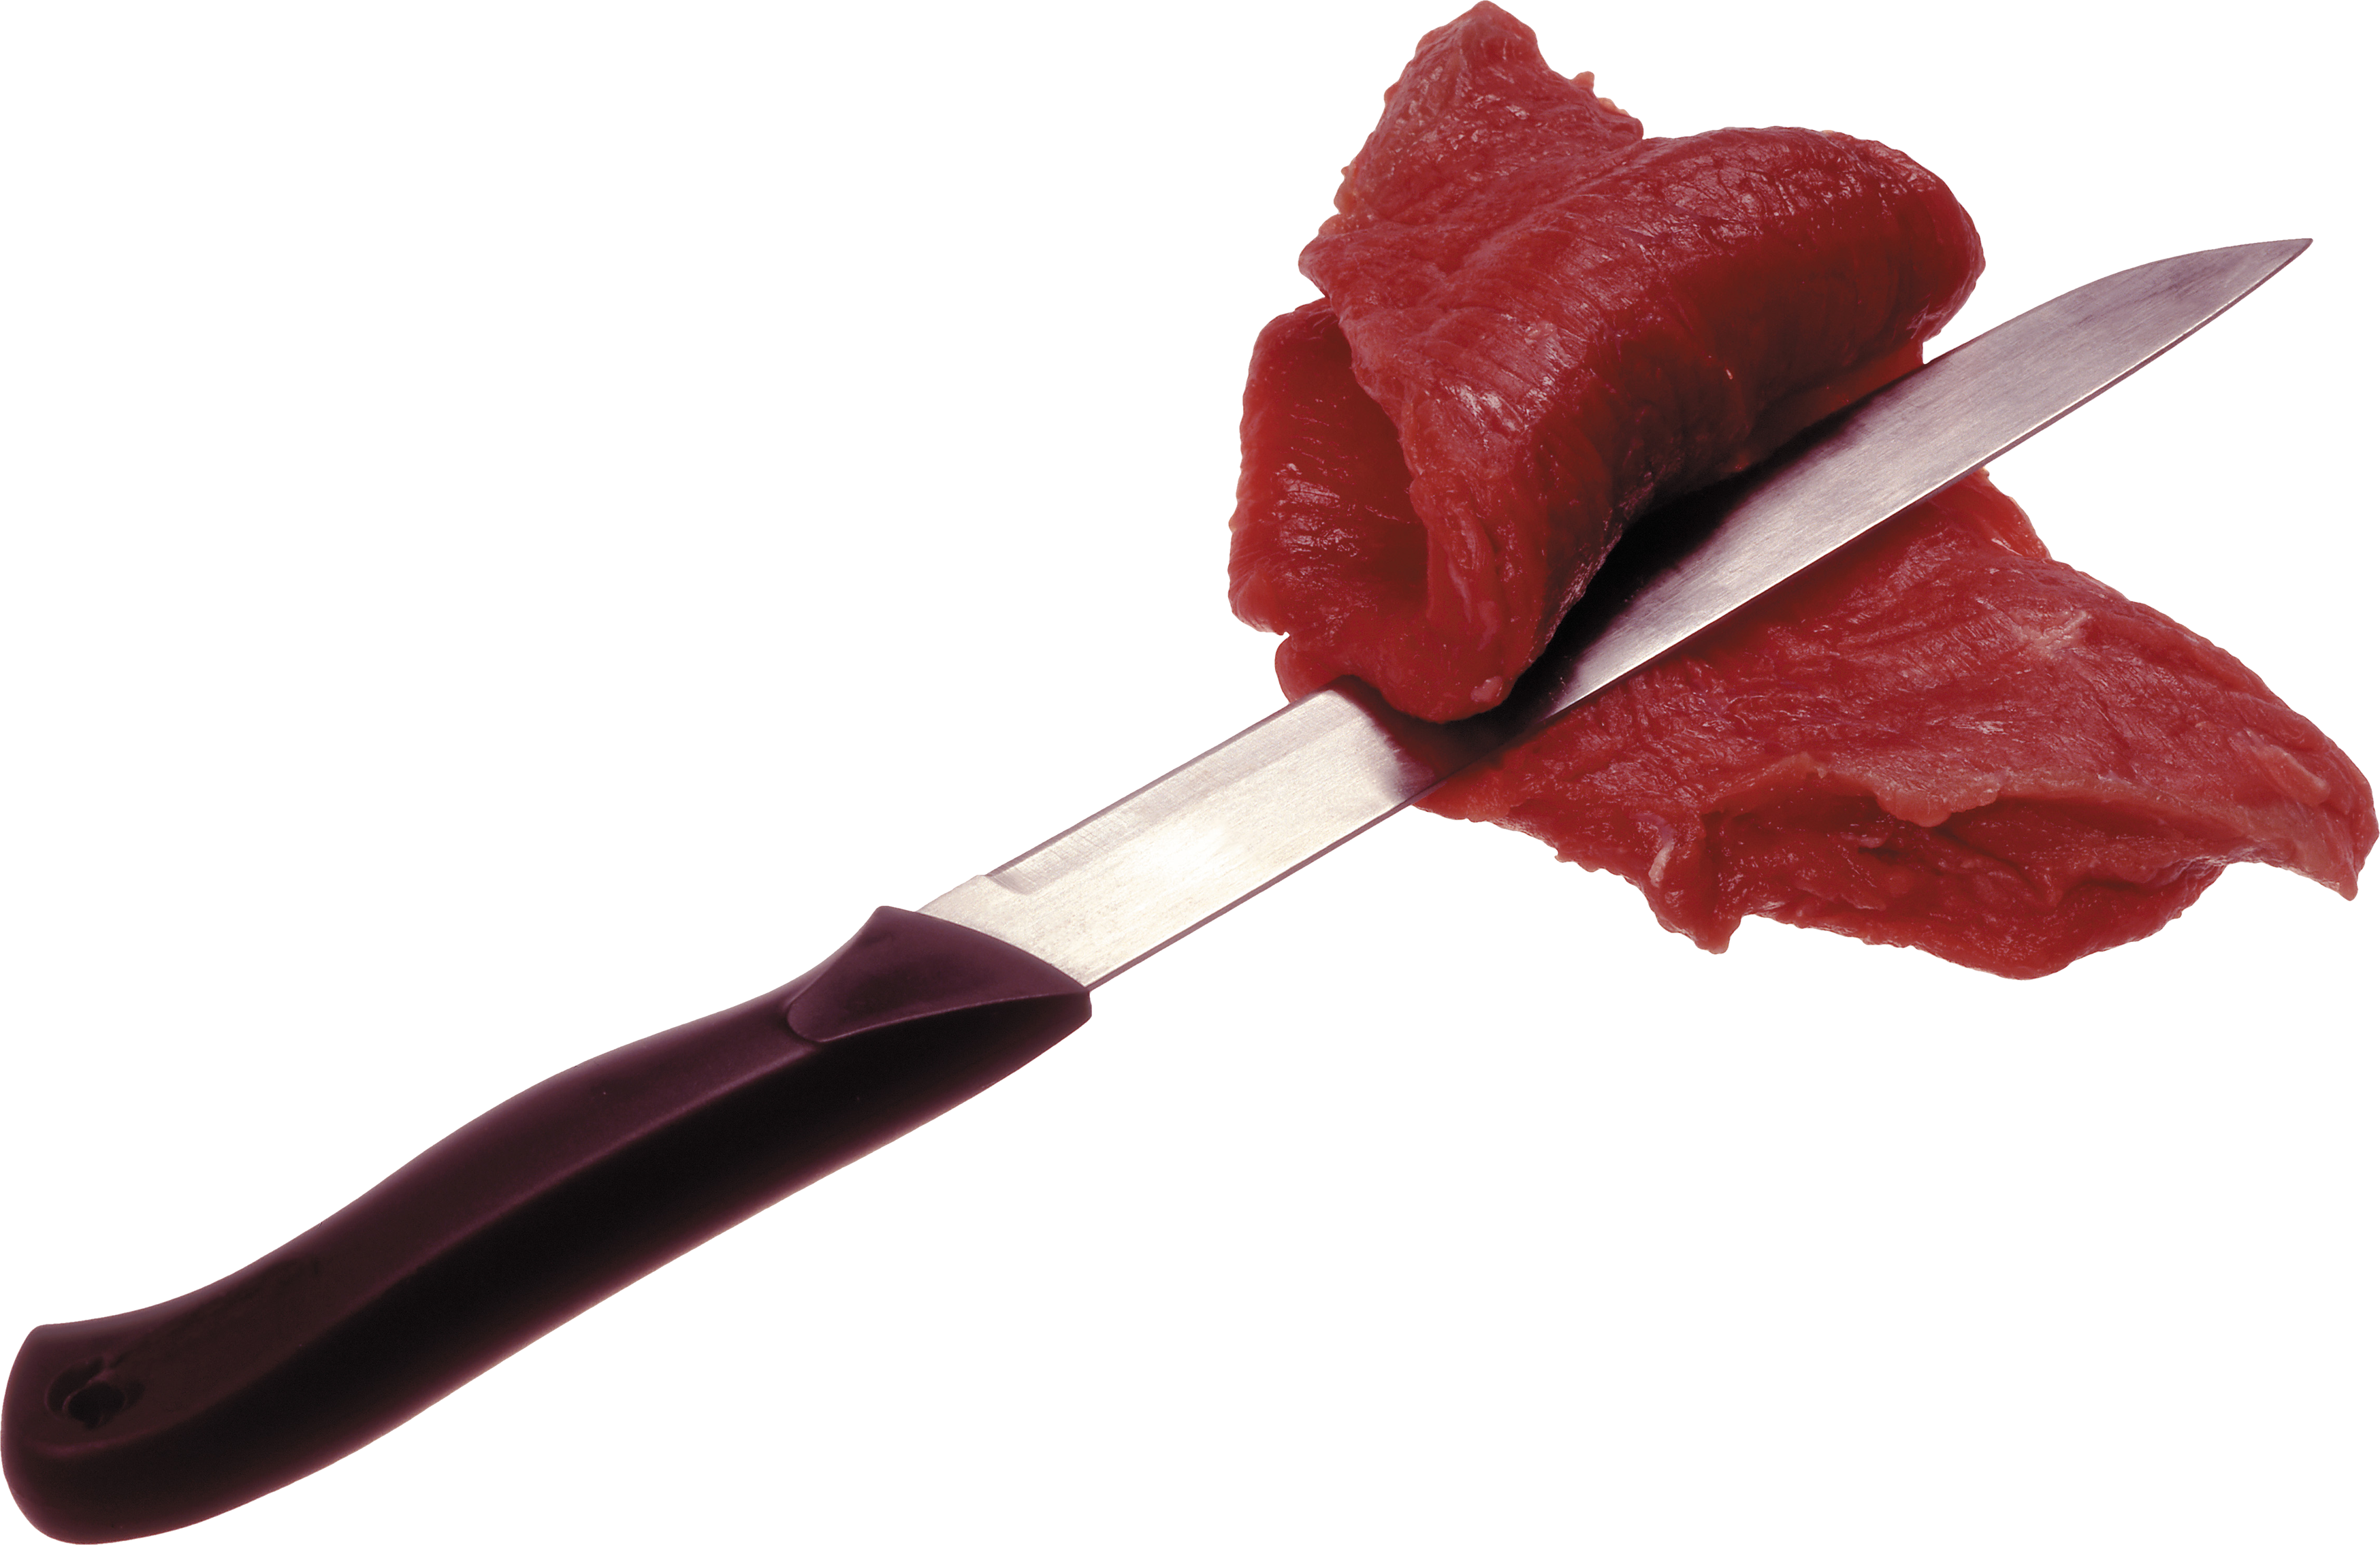 Knife clipart butcher knife. Meat twenty three isolated